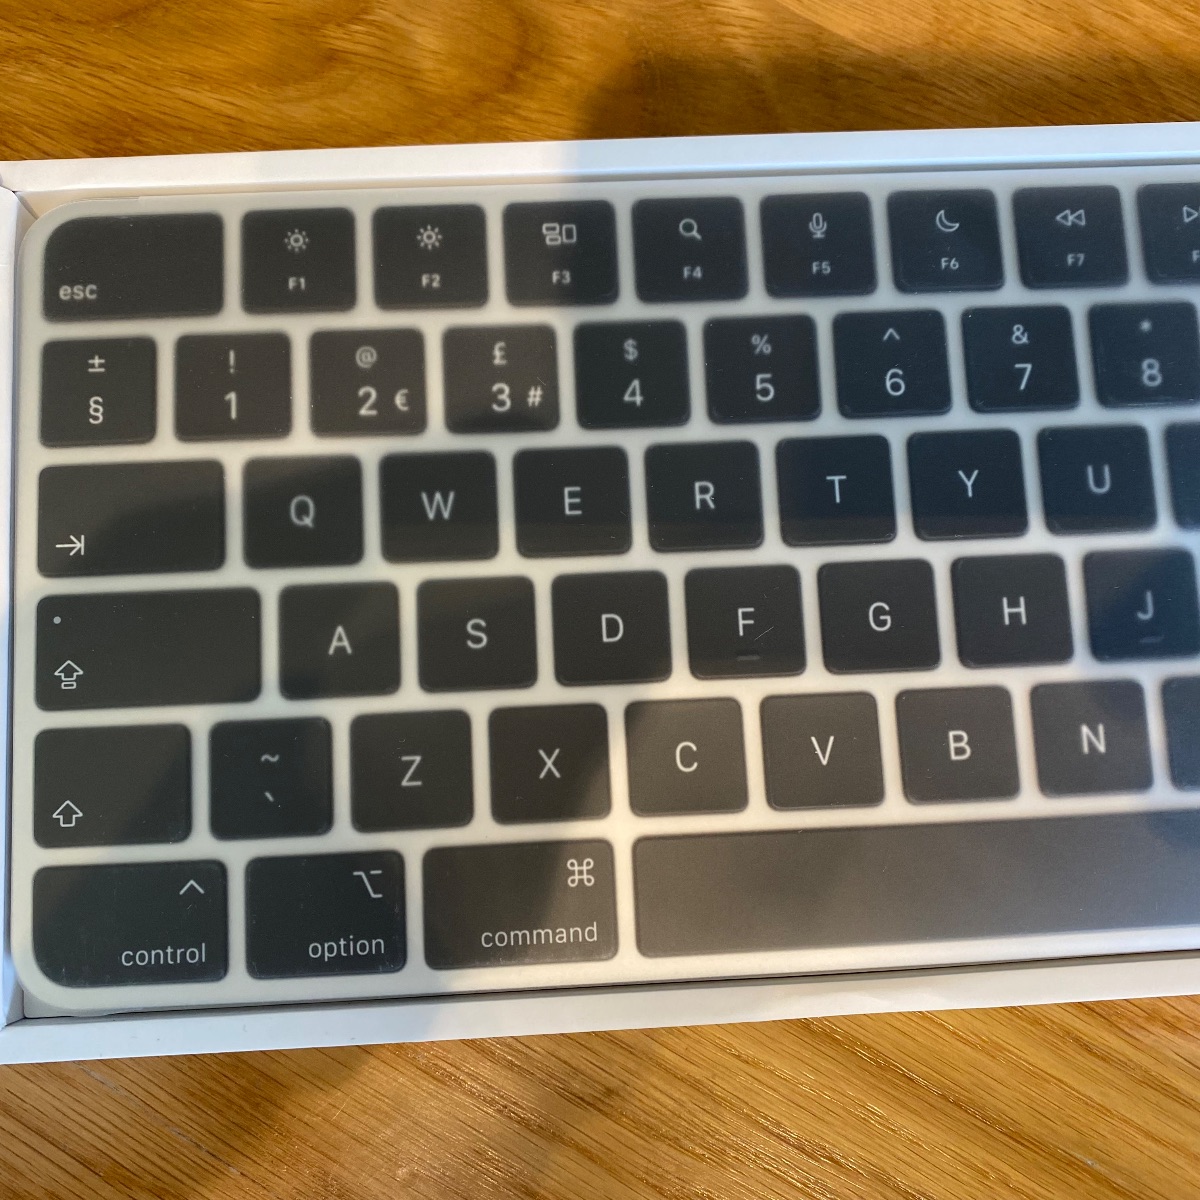 Apple Magic Keyboard with Touch ID and Numeric Keypad Black British UK M1 Silico Mmmr3b/a 19452986868 (Brand New & Sealed)